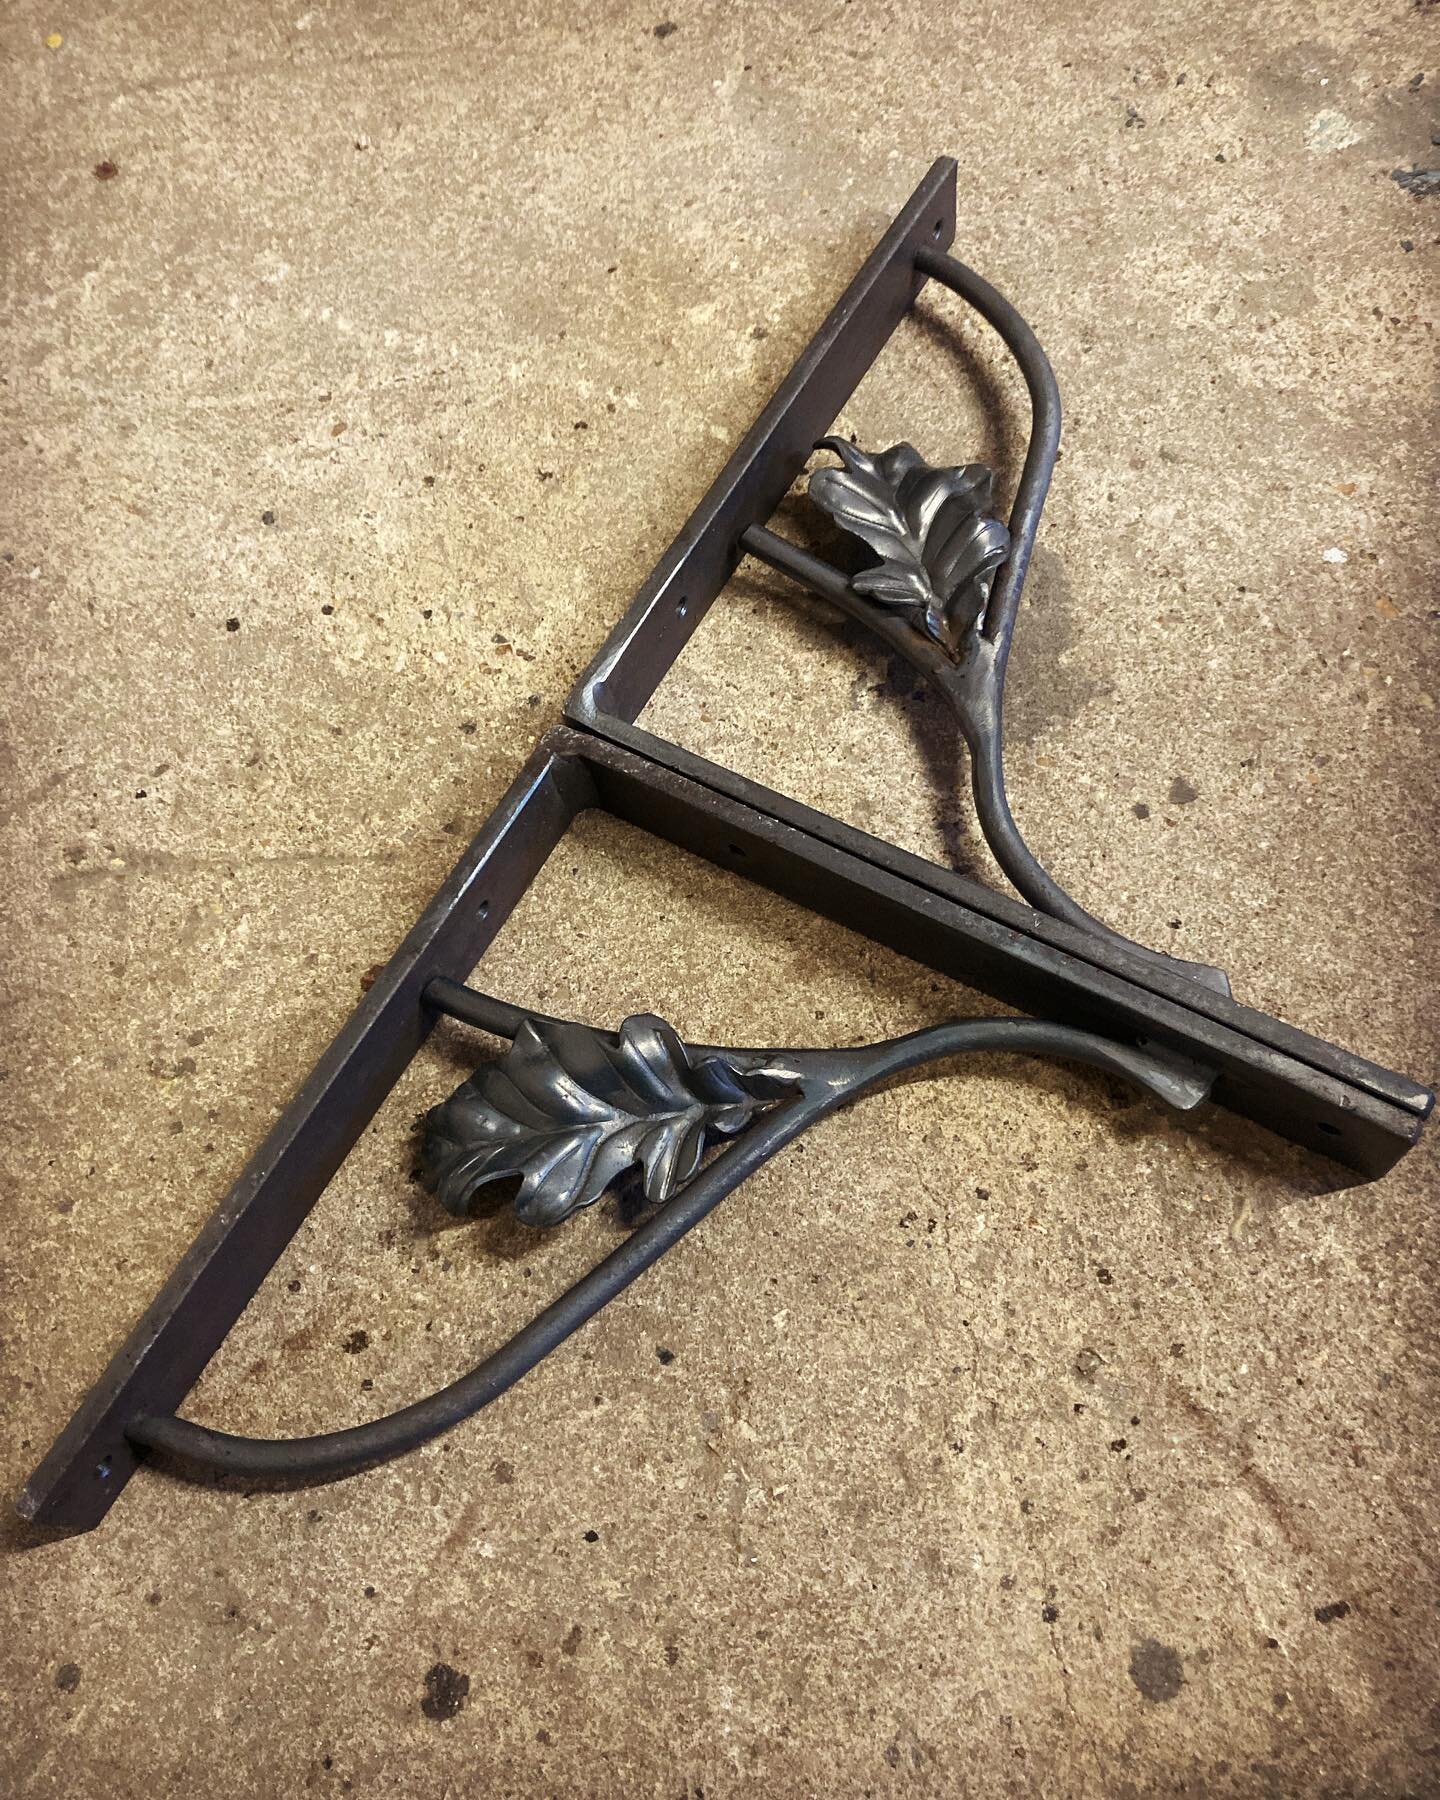 Not made a set of these shelf brackets in a while! #shelfbrackets #shelving #cottage #rustic #oak #oakleaves #nature #blacksmith #forged #forging #artistblacksmith